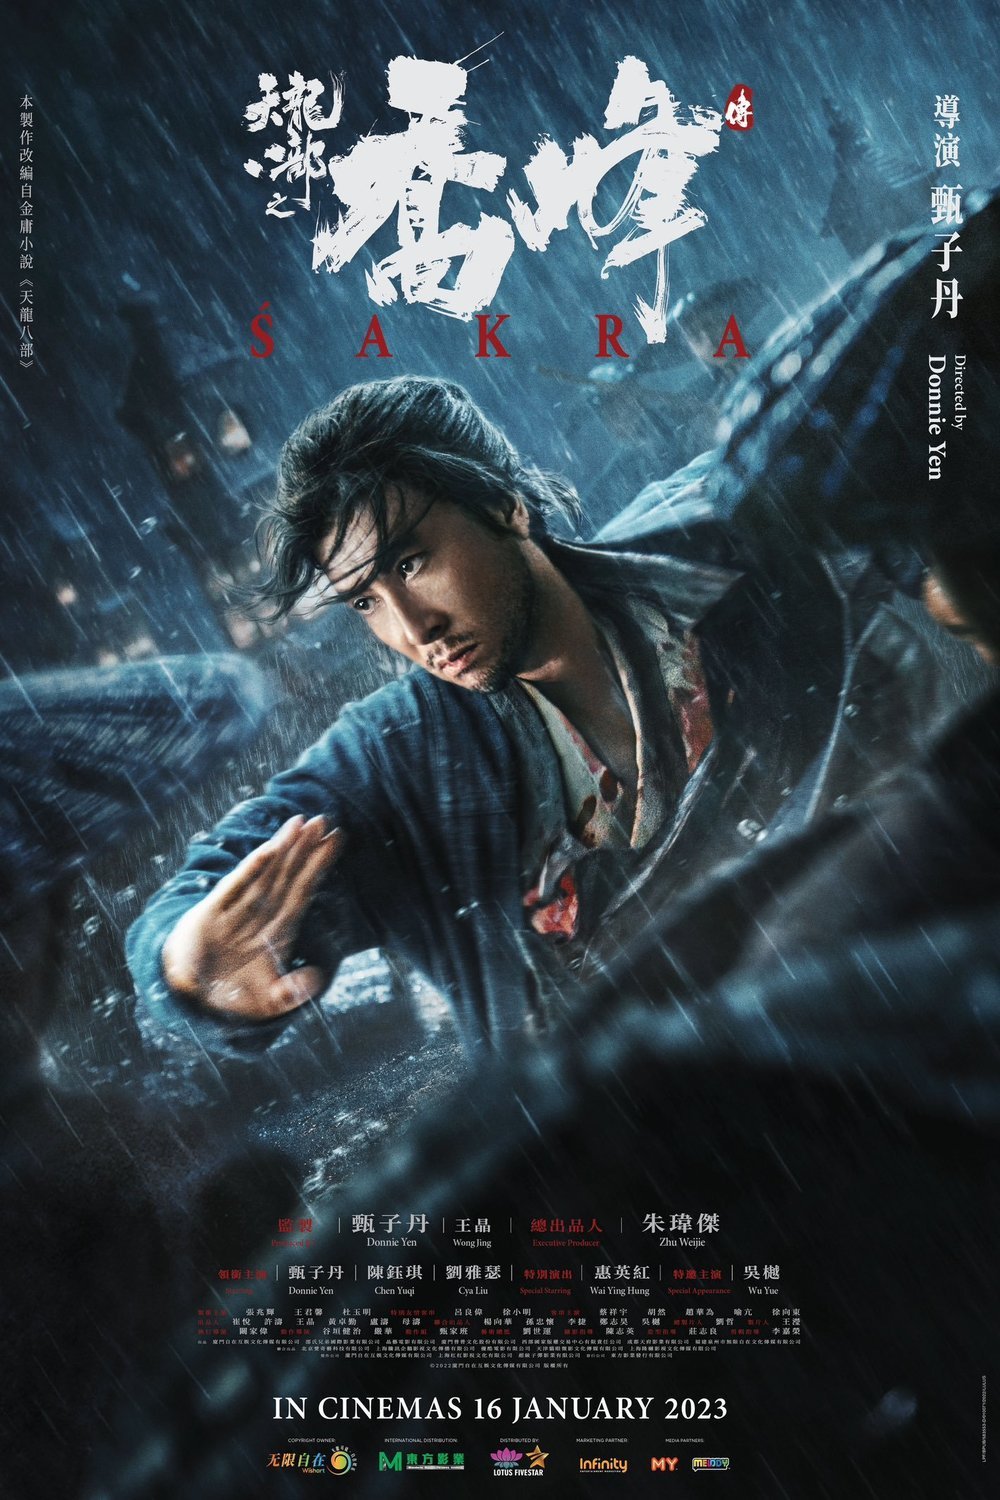 Chinese poster of the movie Sakra